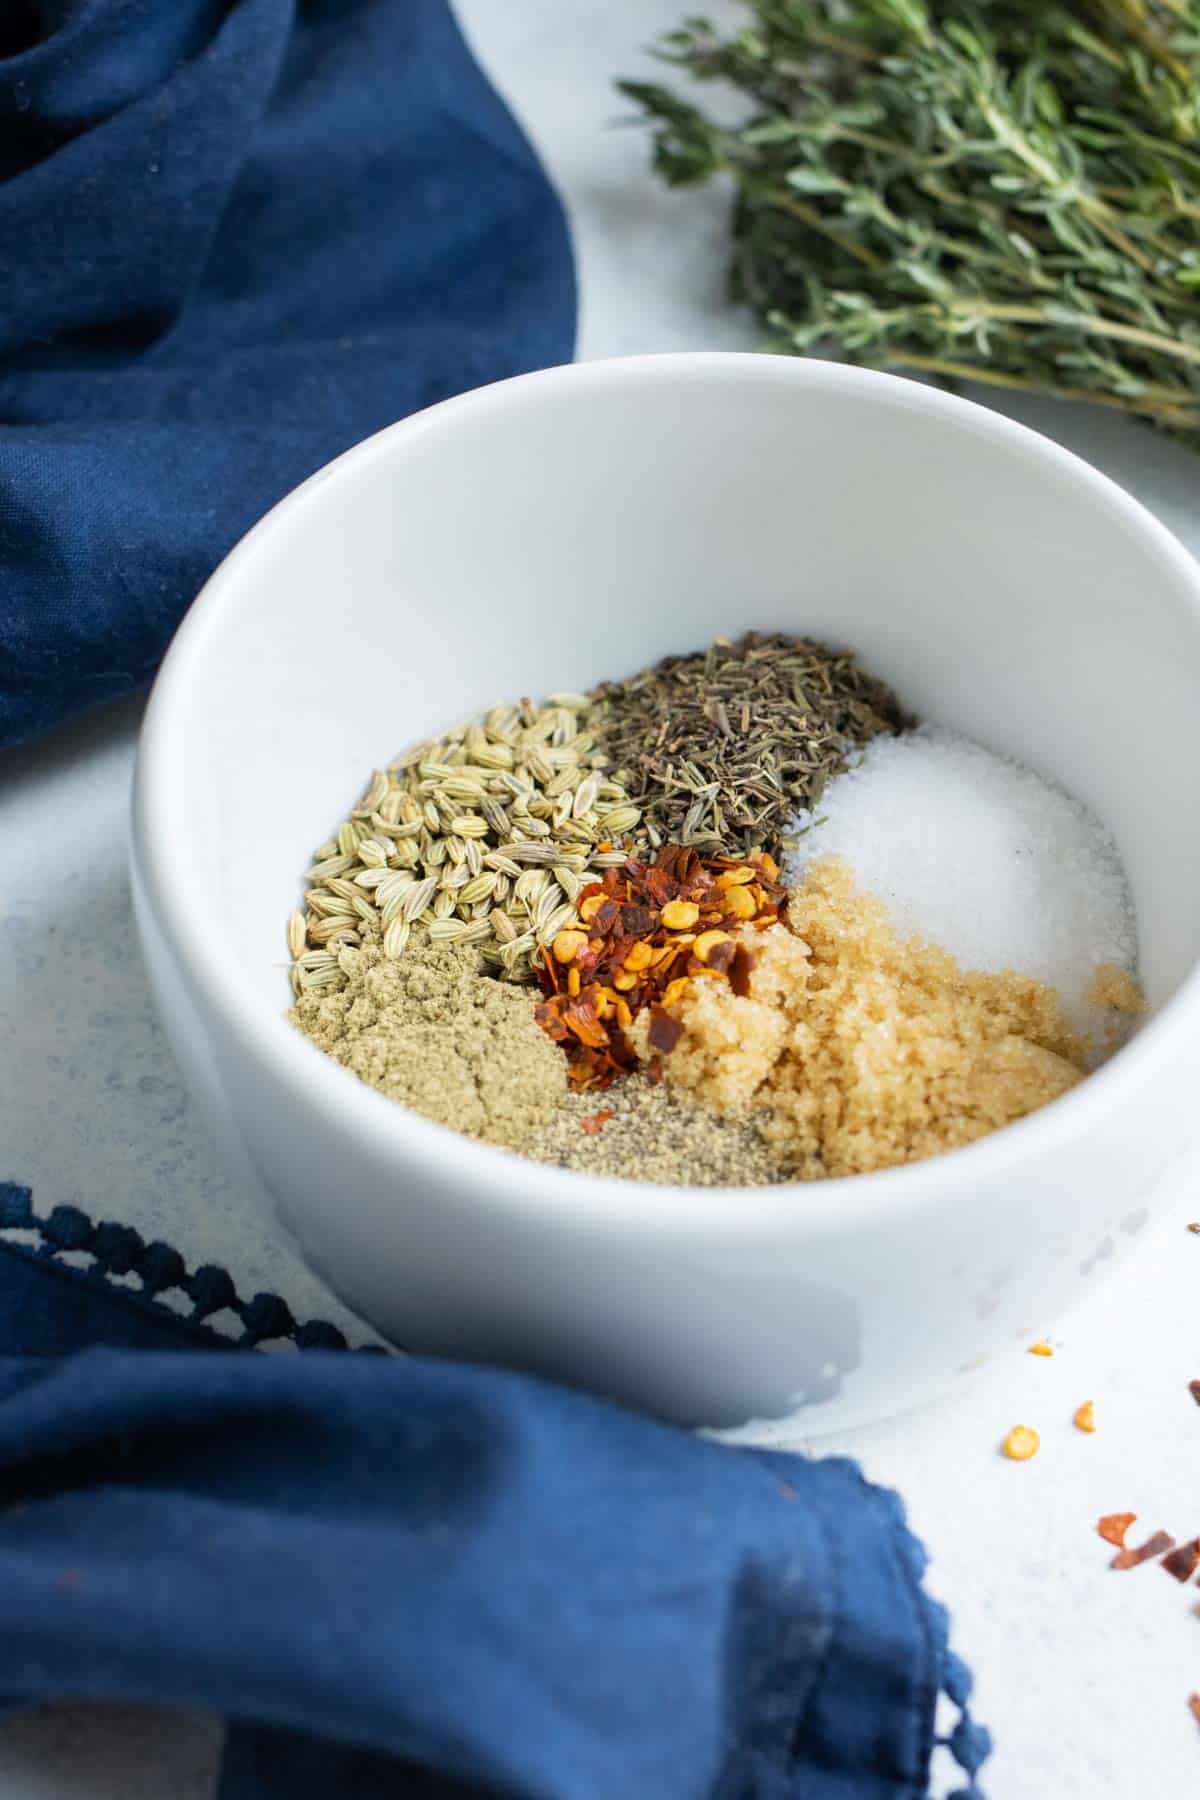 Homemade Breakfast Sausage Spice Blend (Simple Allergy-Friendly Mix!)